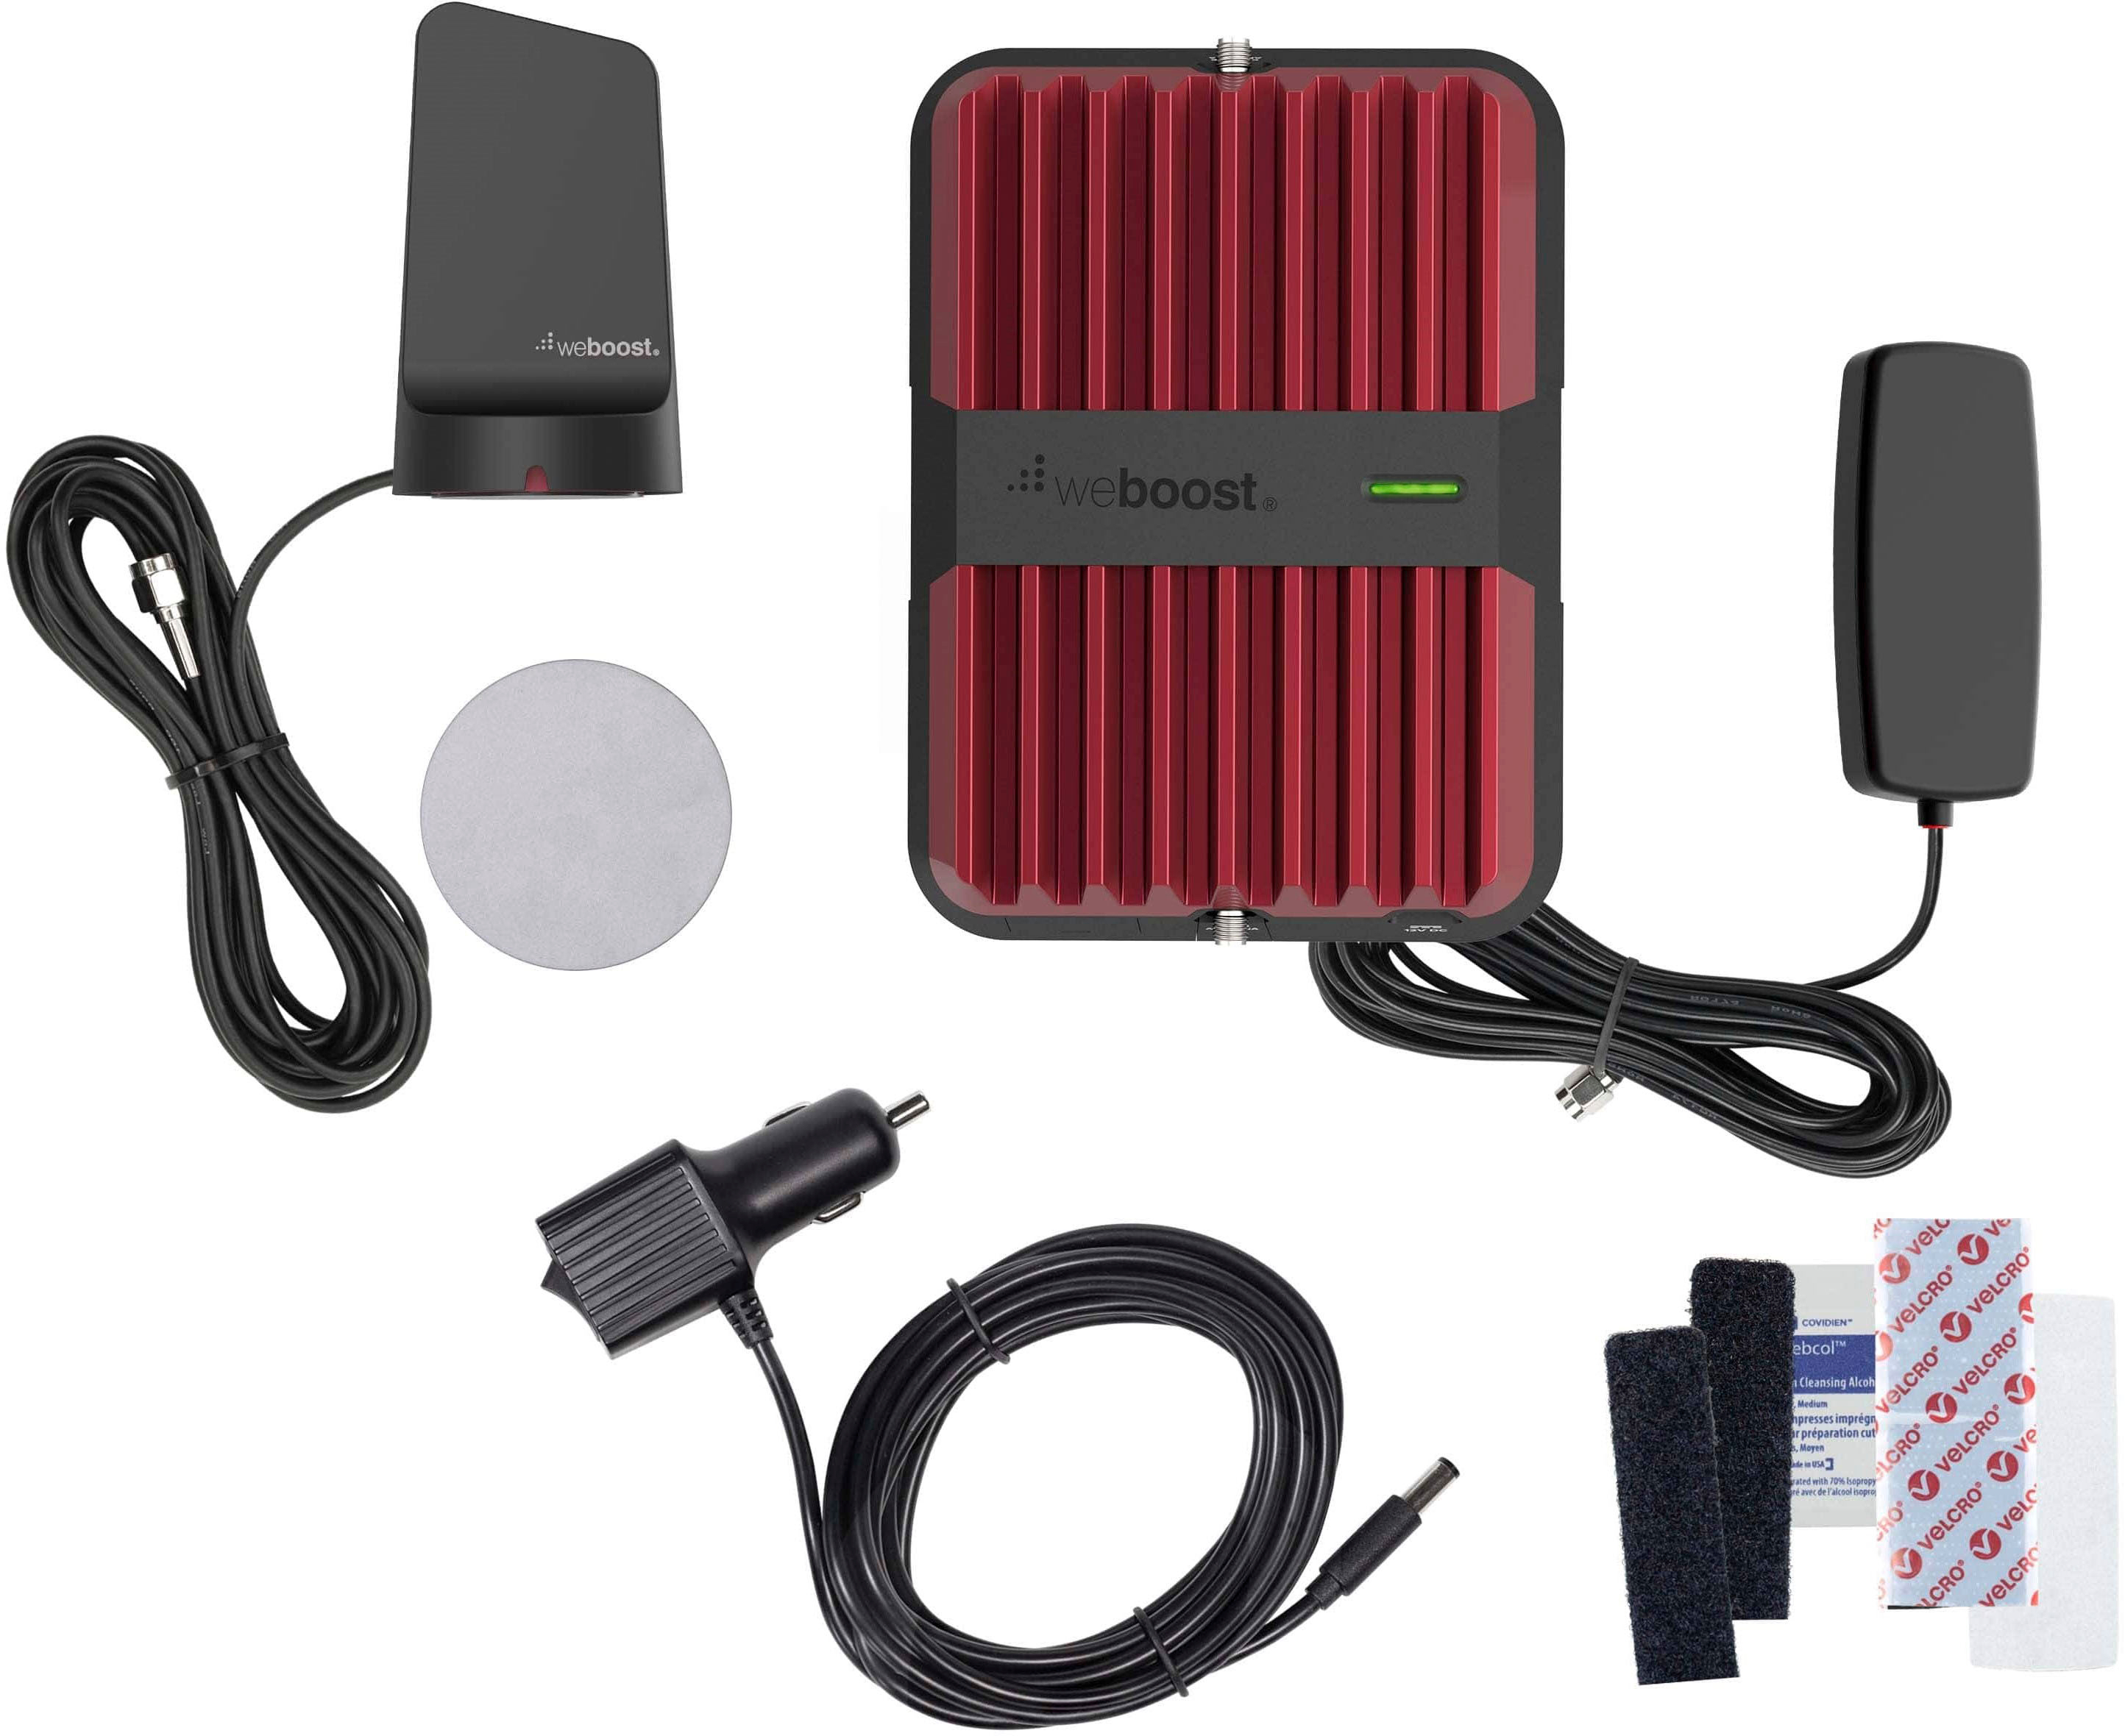 Left View: weBoost - Drive Reach Vehicle Cell Phone Signal Booster Kit for Car, Truck, and SUV, Boosts 5G & 4G LTE for All U.S. Carriers - Red